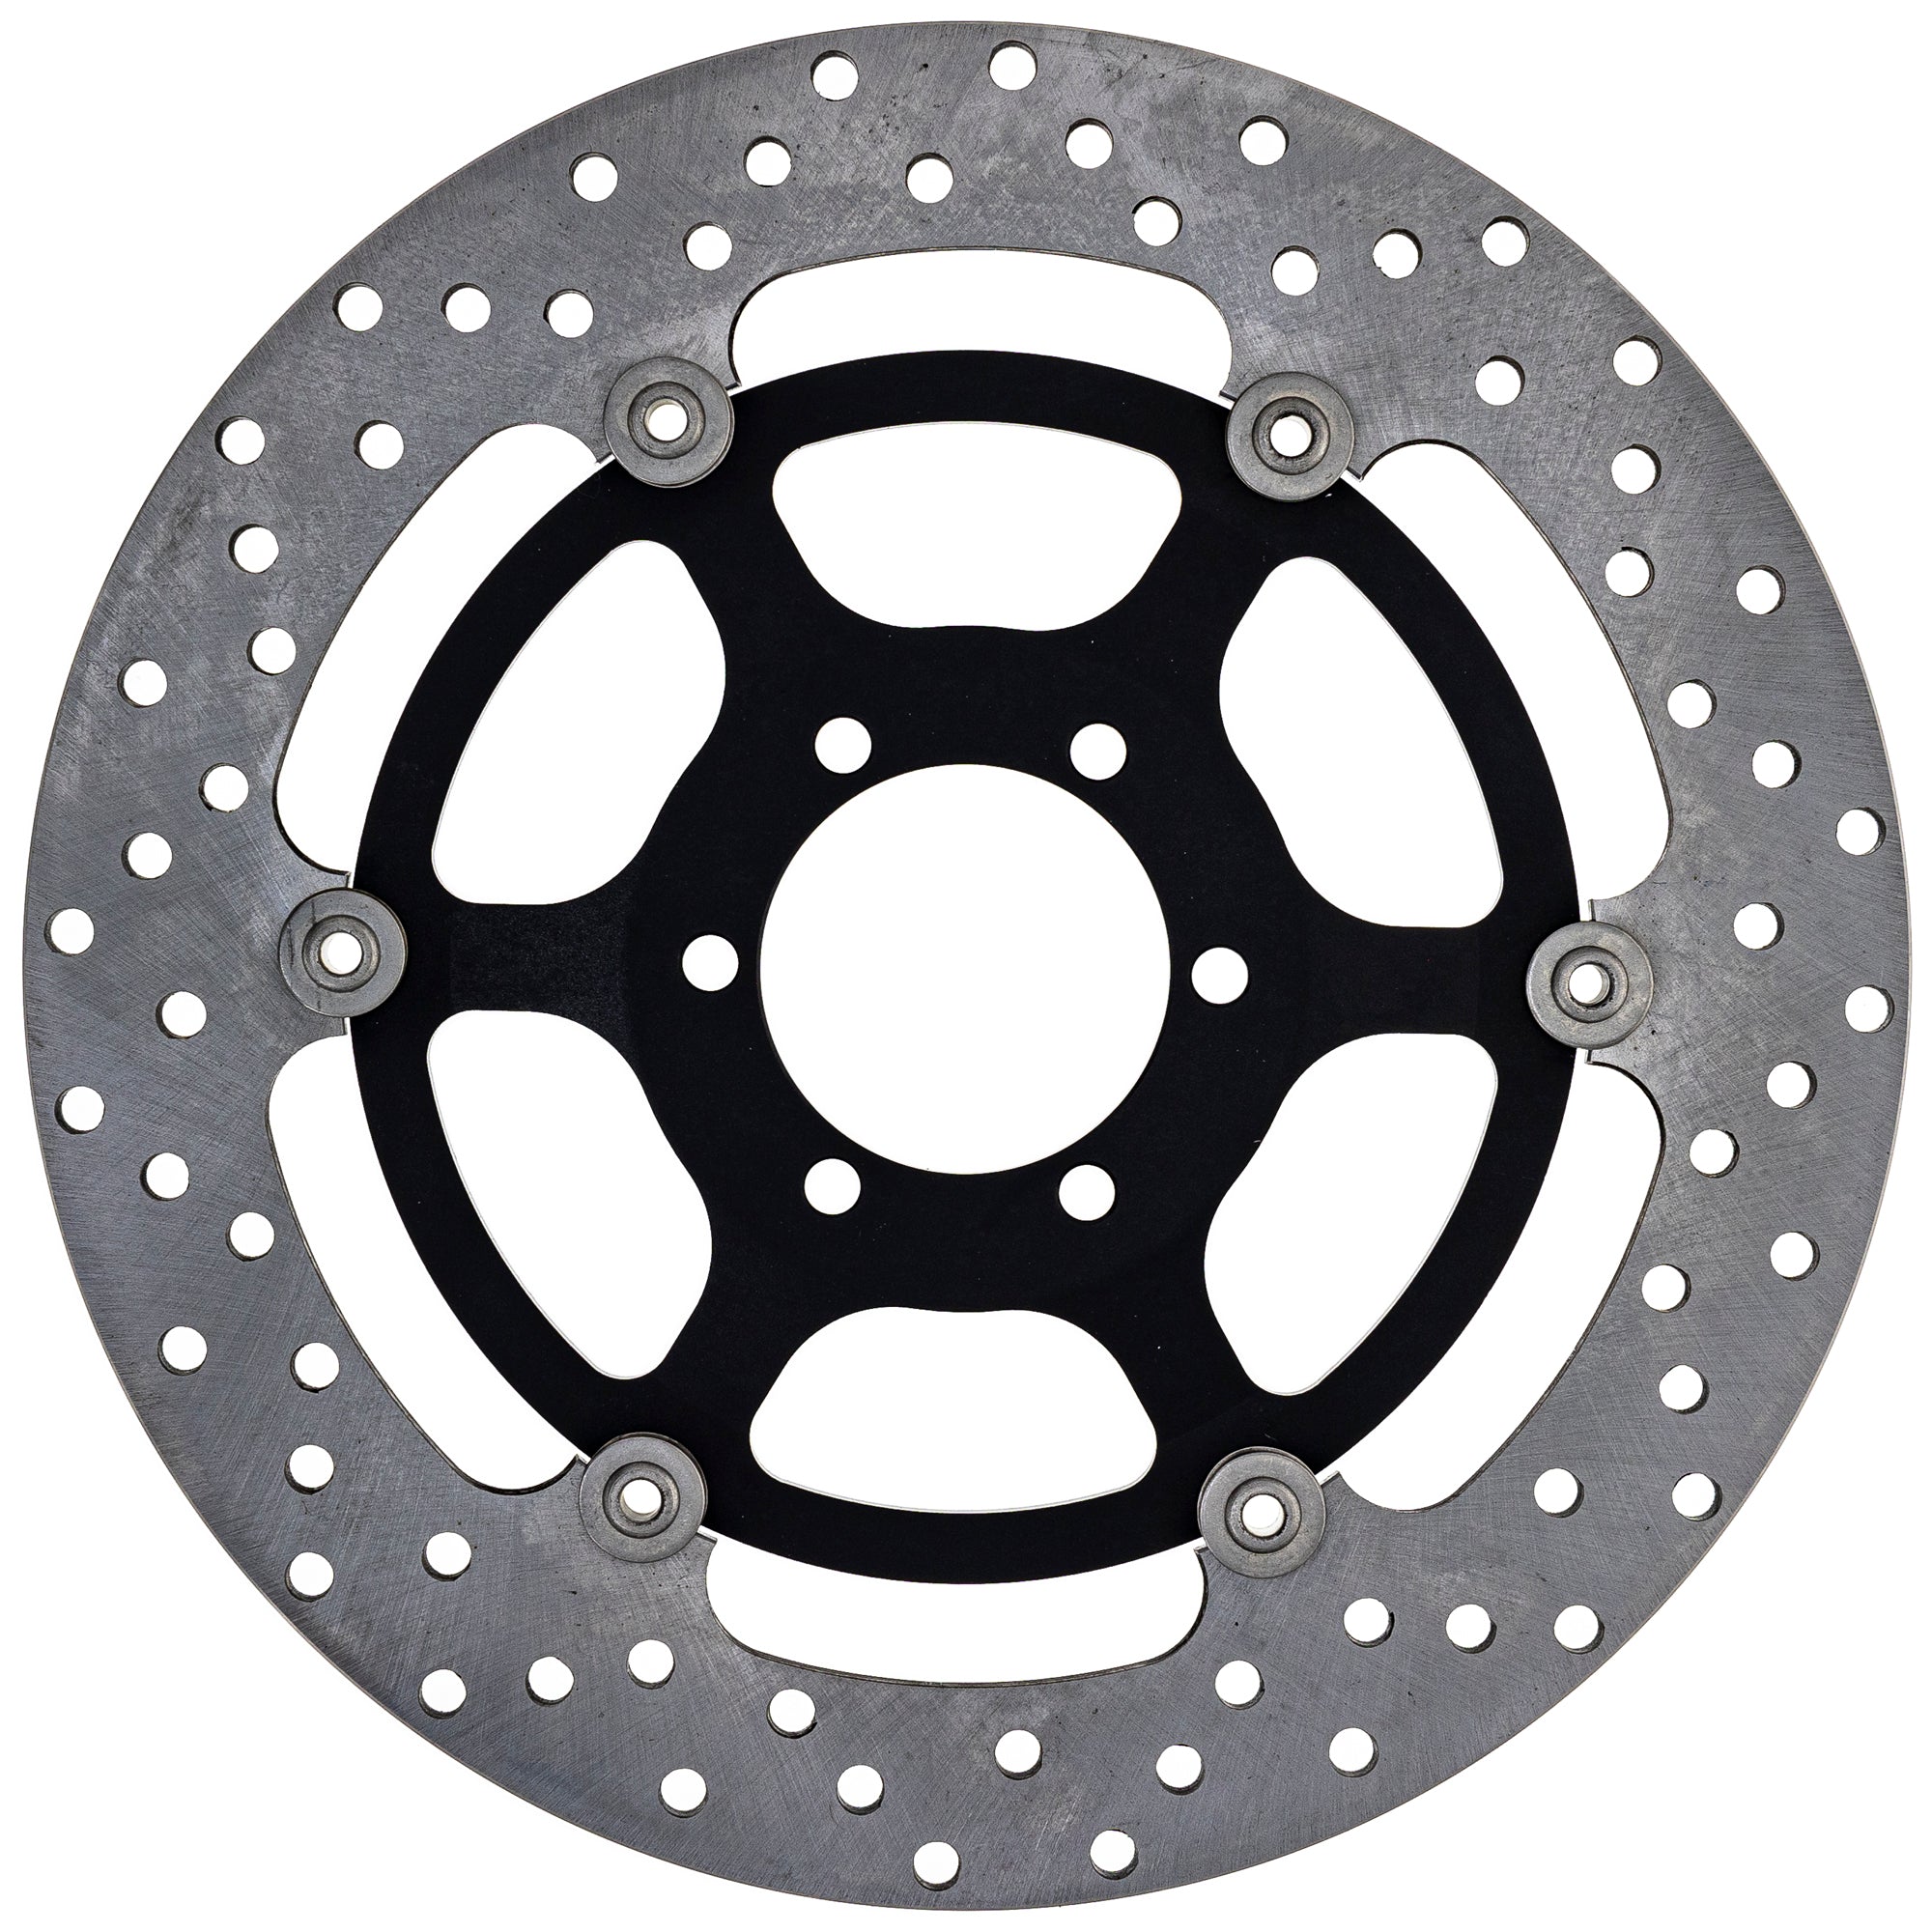 Front Brake Rotor for zOTHER YZF600R TDM850 FZR600R FZR600 NICHE 519-CRT2373R